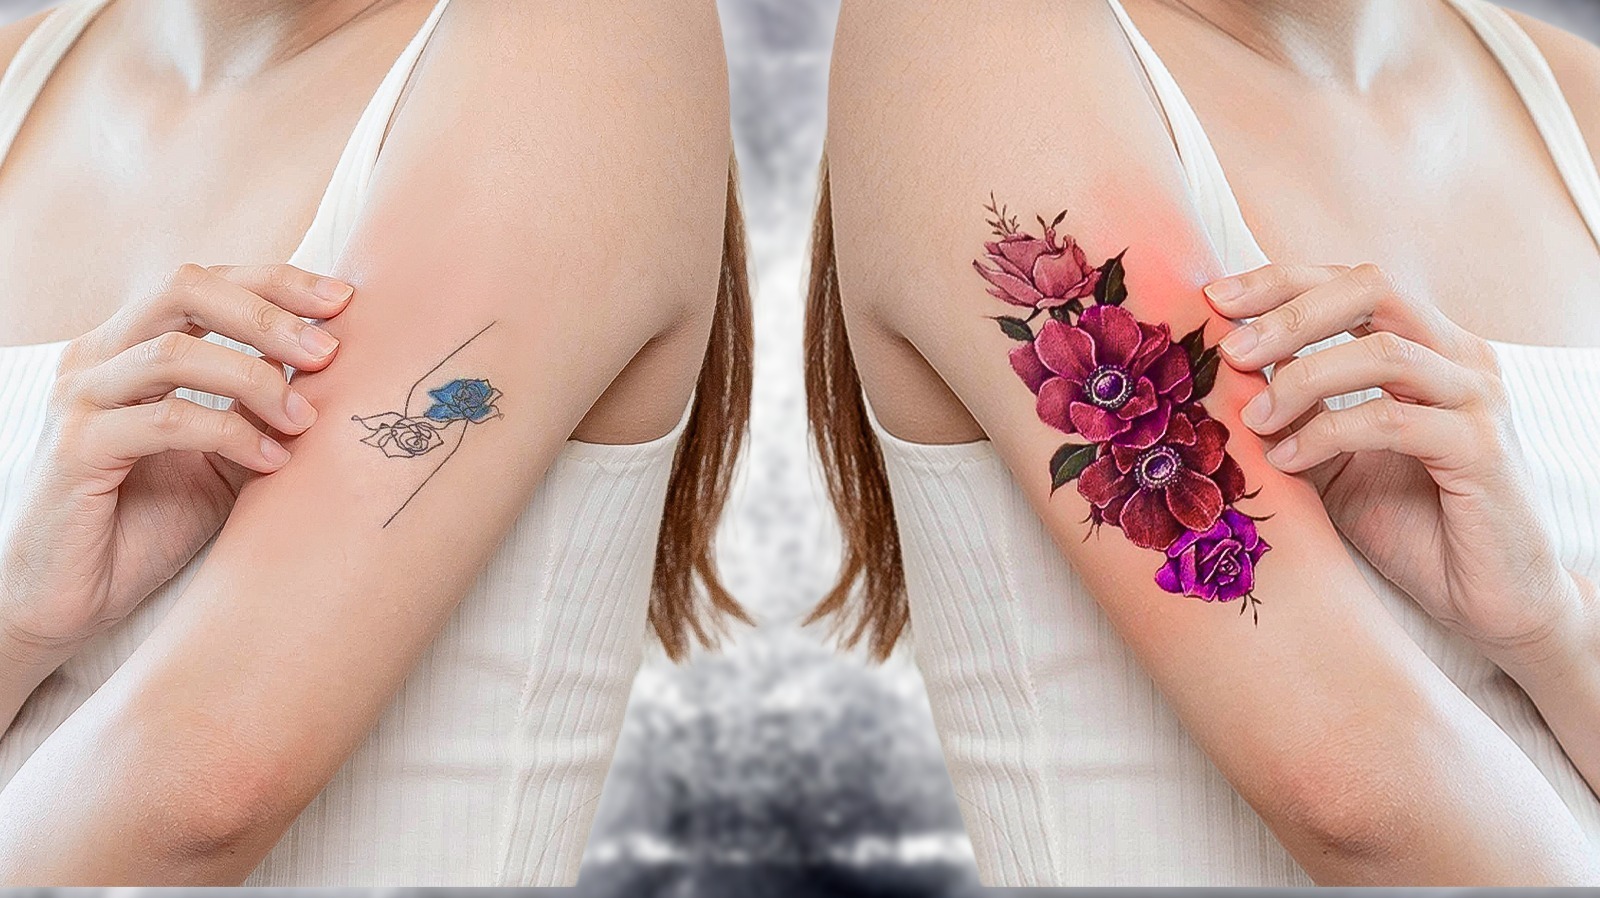 Clever Cover Up Tattoos After The Break Up « Ink Art Tattoos